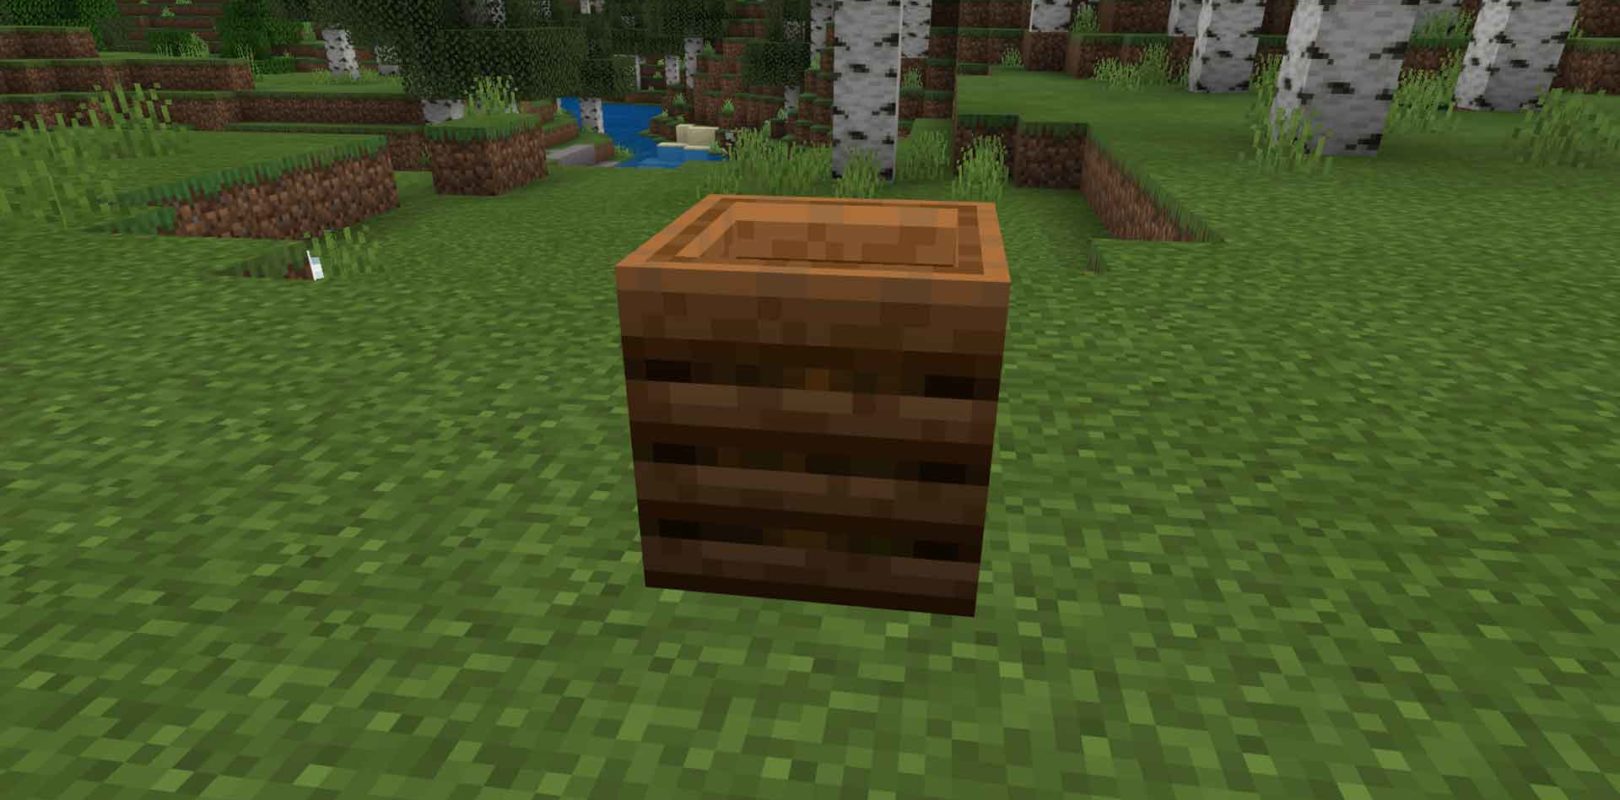 Minecraft Composter Guide: How To Craft Composter In The Game